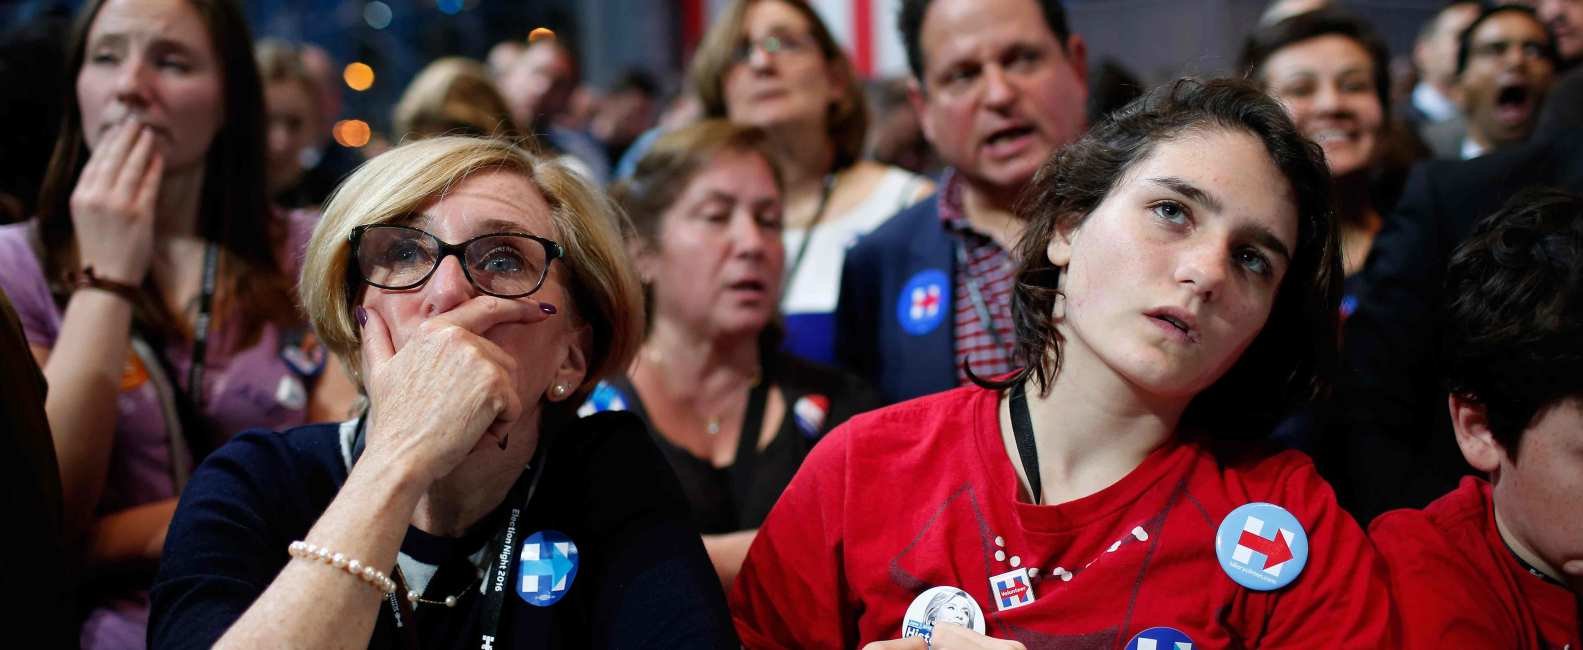 distraught Hillary fans election